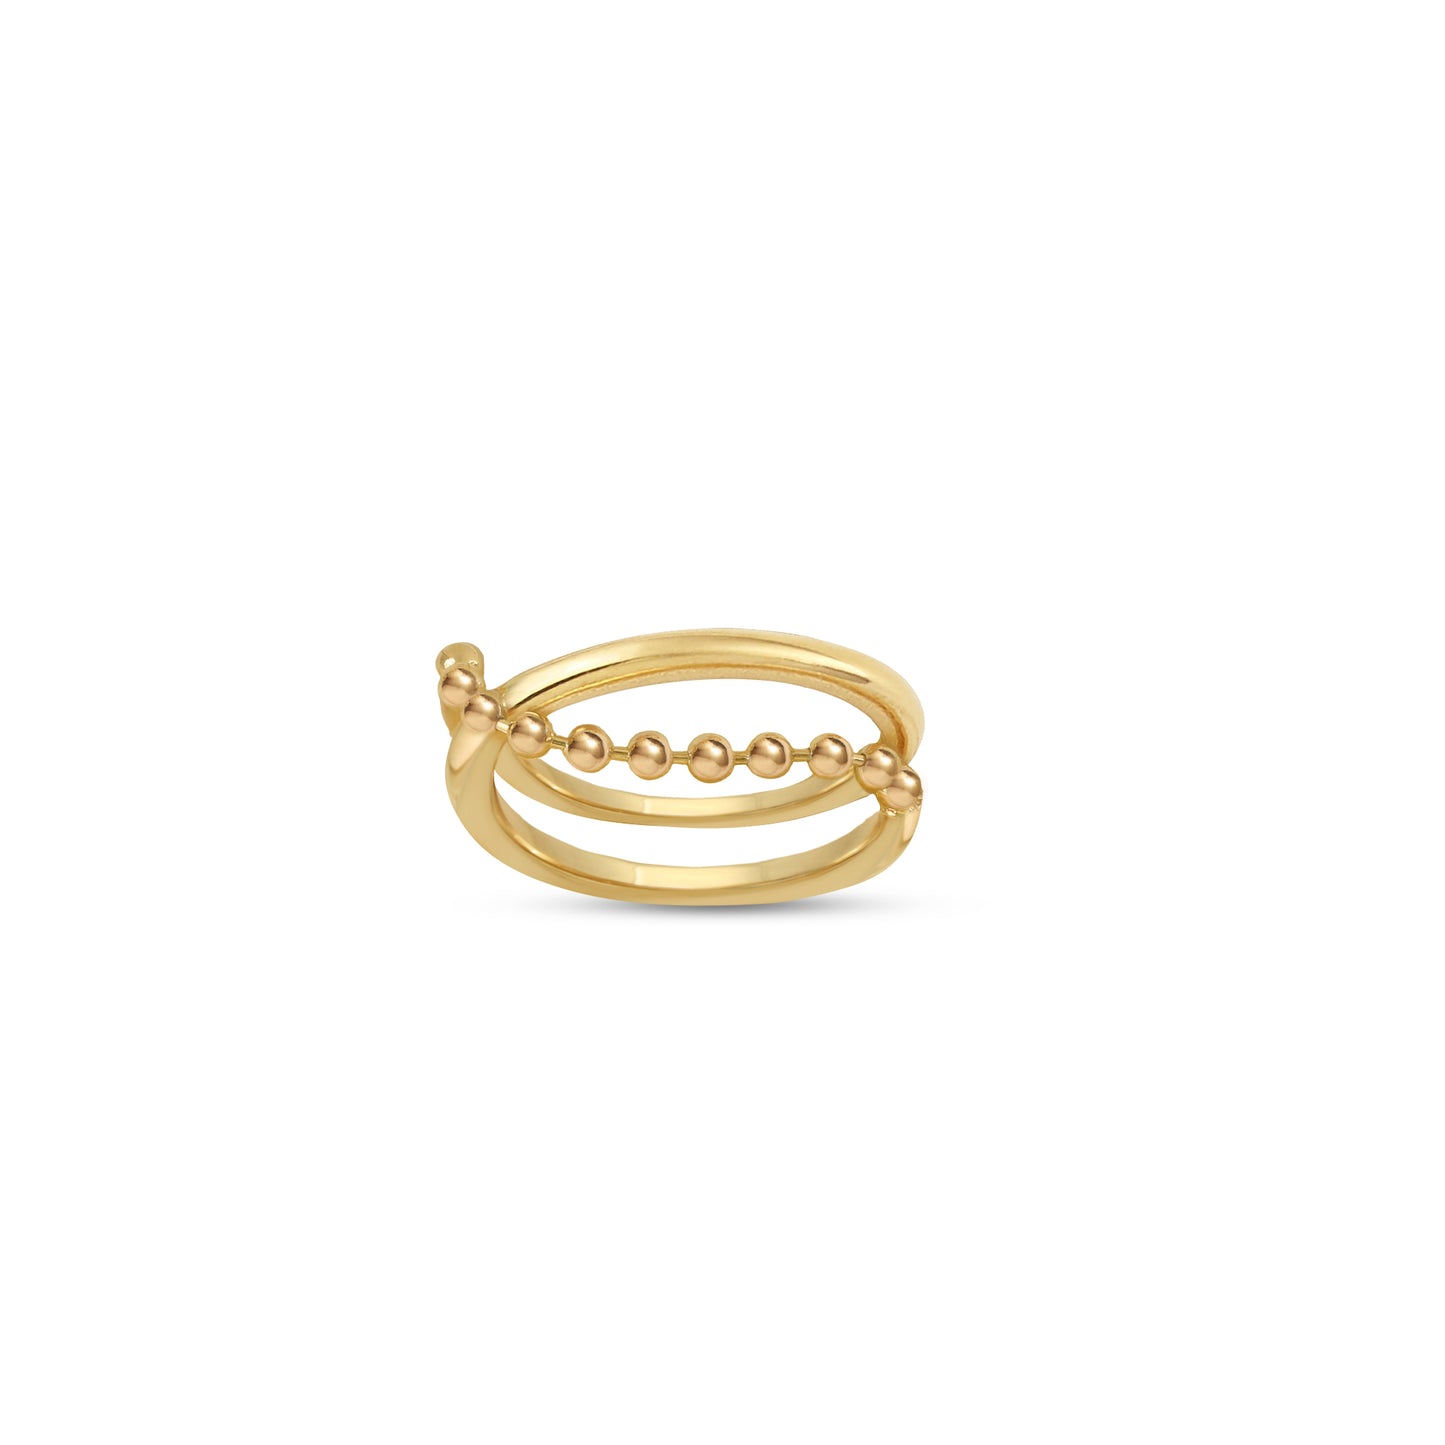 The Moe Layered Ring